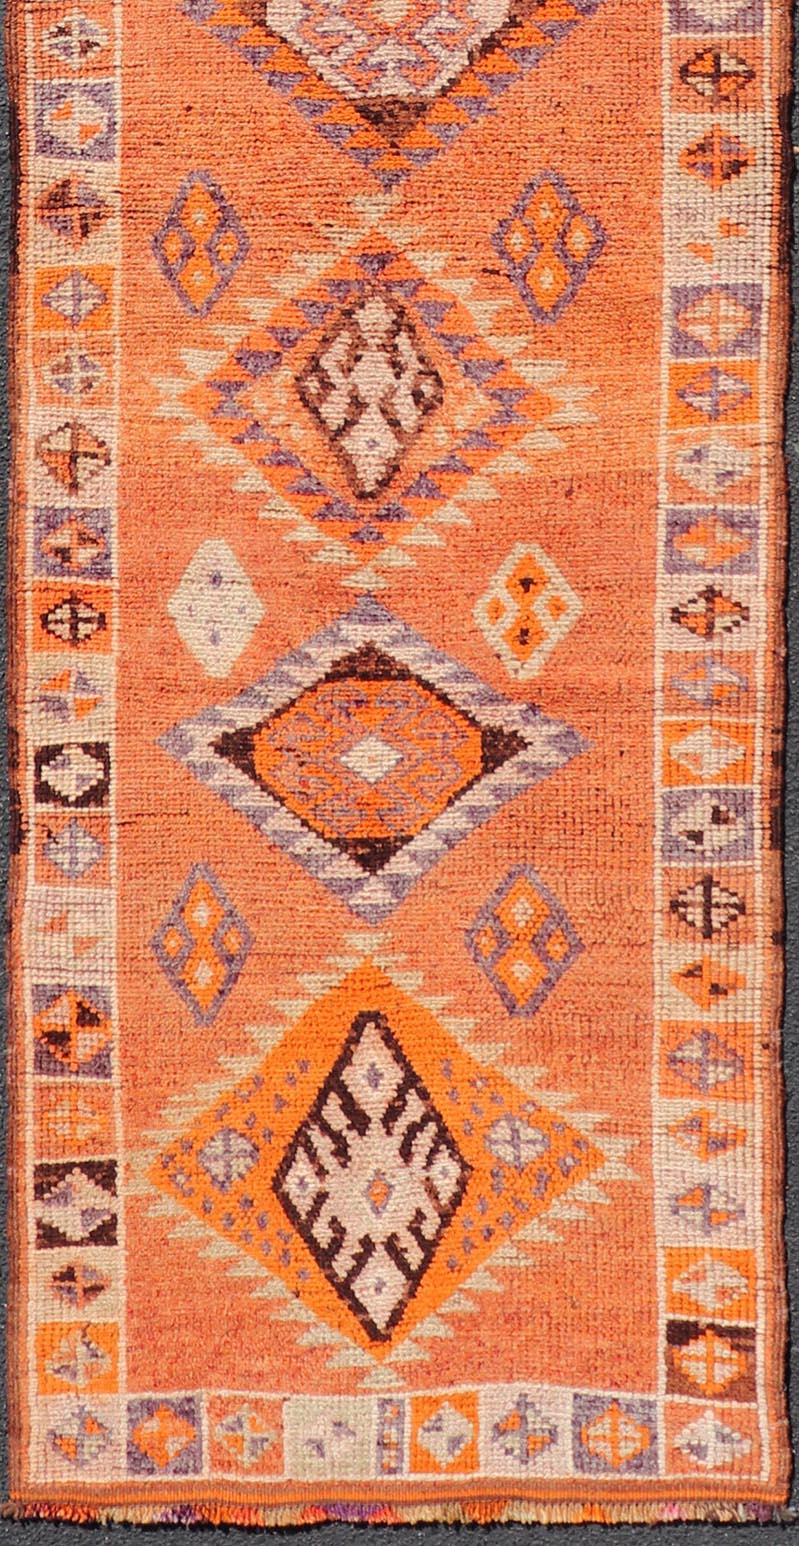 Measures: 3'0 x 14'2 
Multicolored Midcentury Turkish Kurdish Oushak Runner with Diamond Medallions. Keivan Woven Arts / rug TU-NED-5022, country of origin / type: Iran / Kurdish Oushak, circa 1950
This Kurdish tribal rug was woven with the emphasis